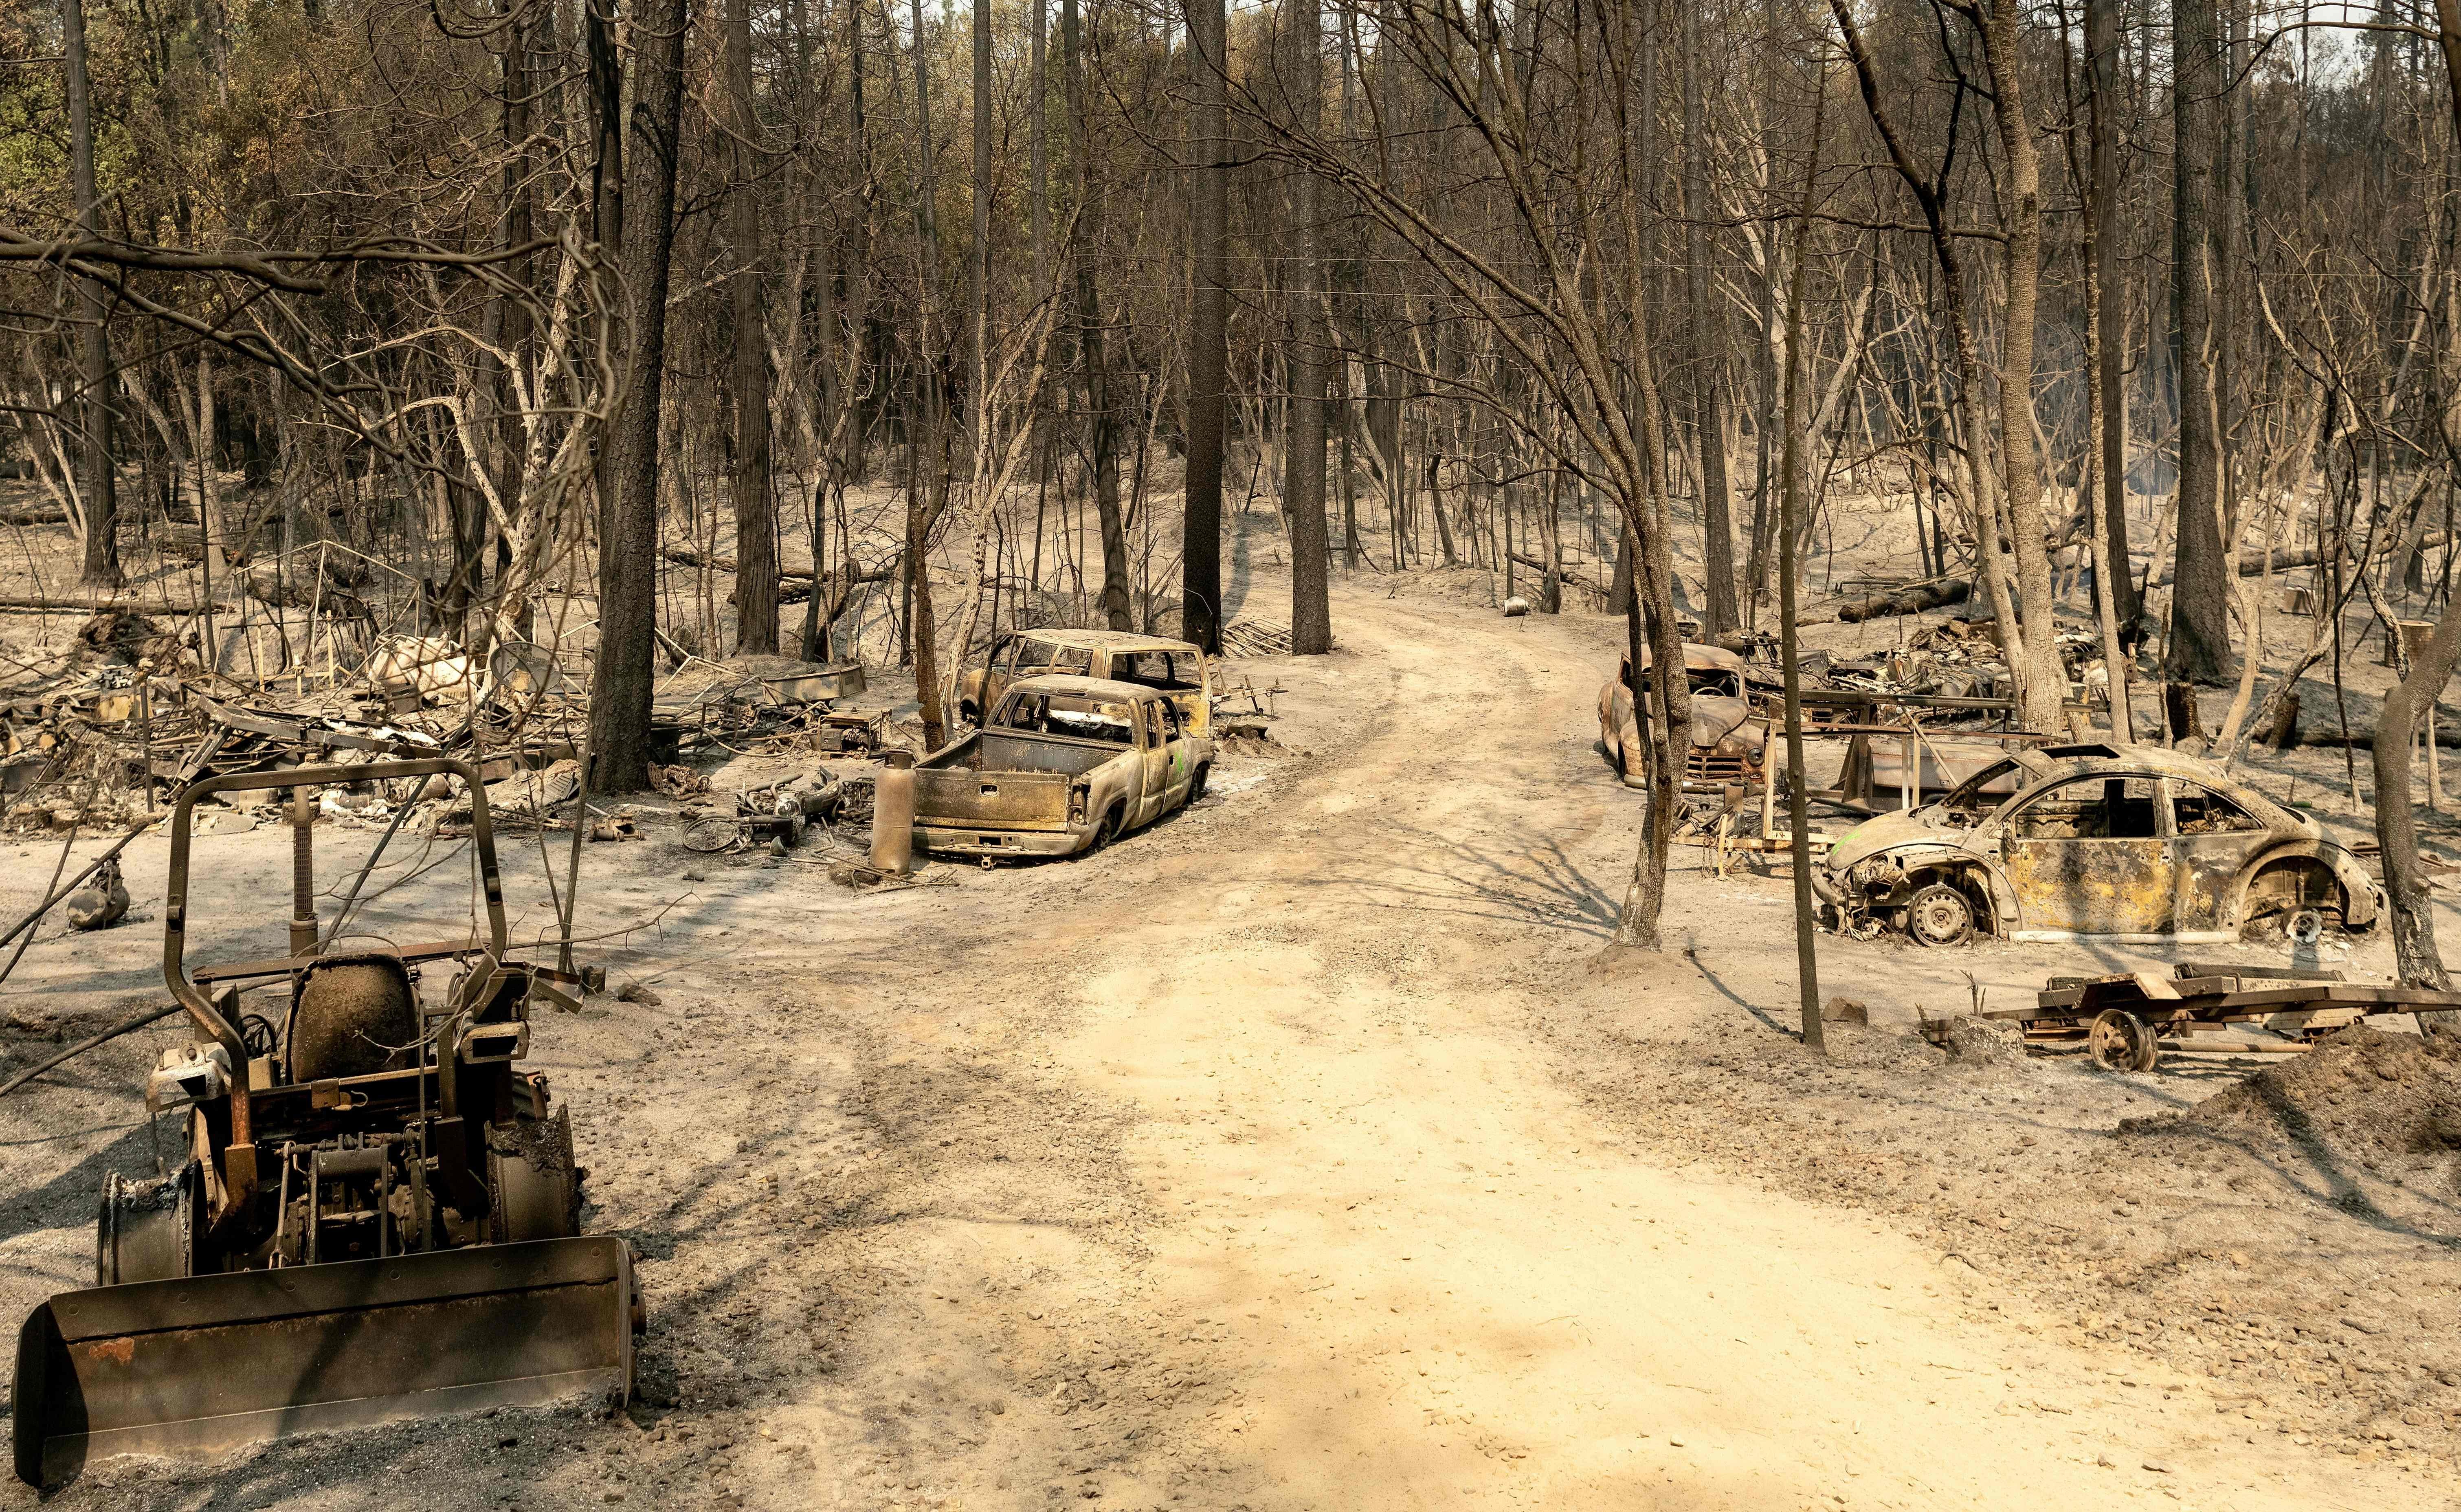 A dusty road surrounded on both sides by burnt trees and vehicles.